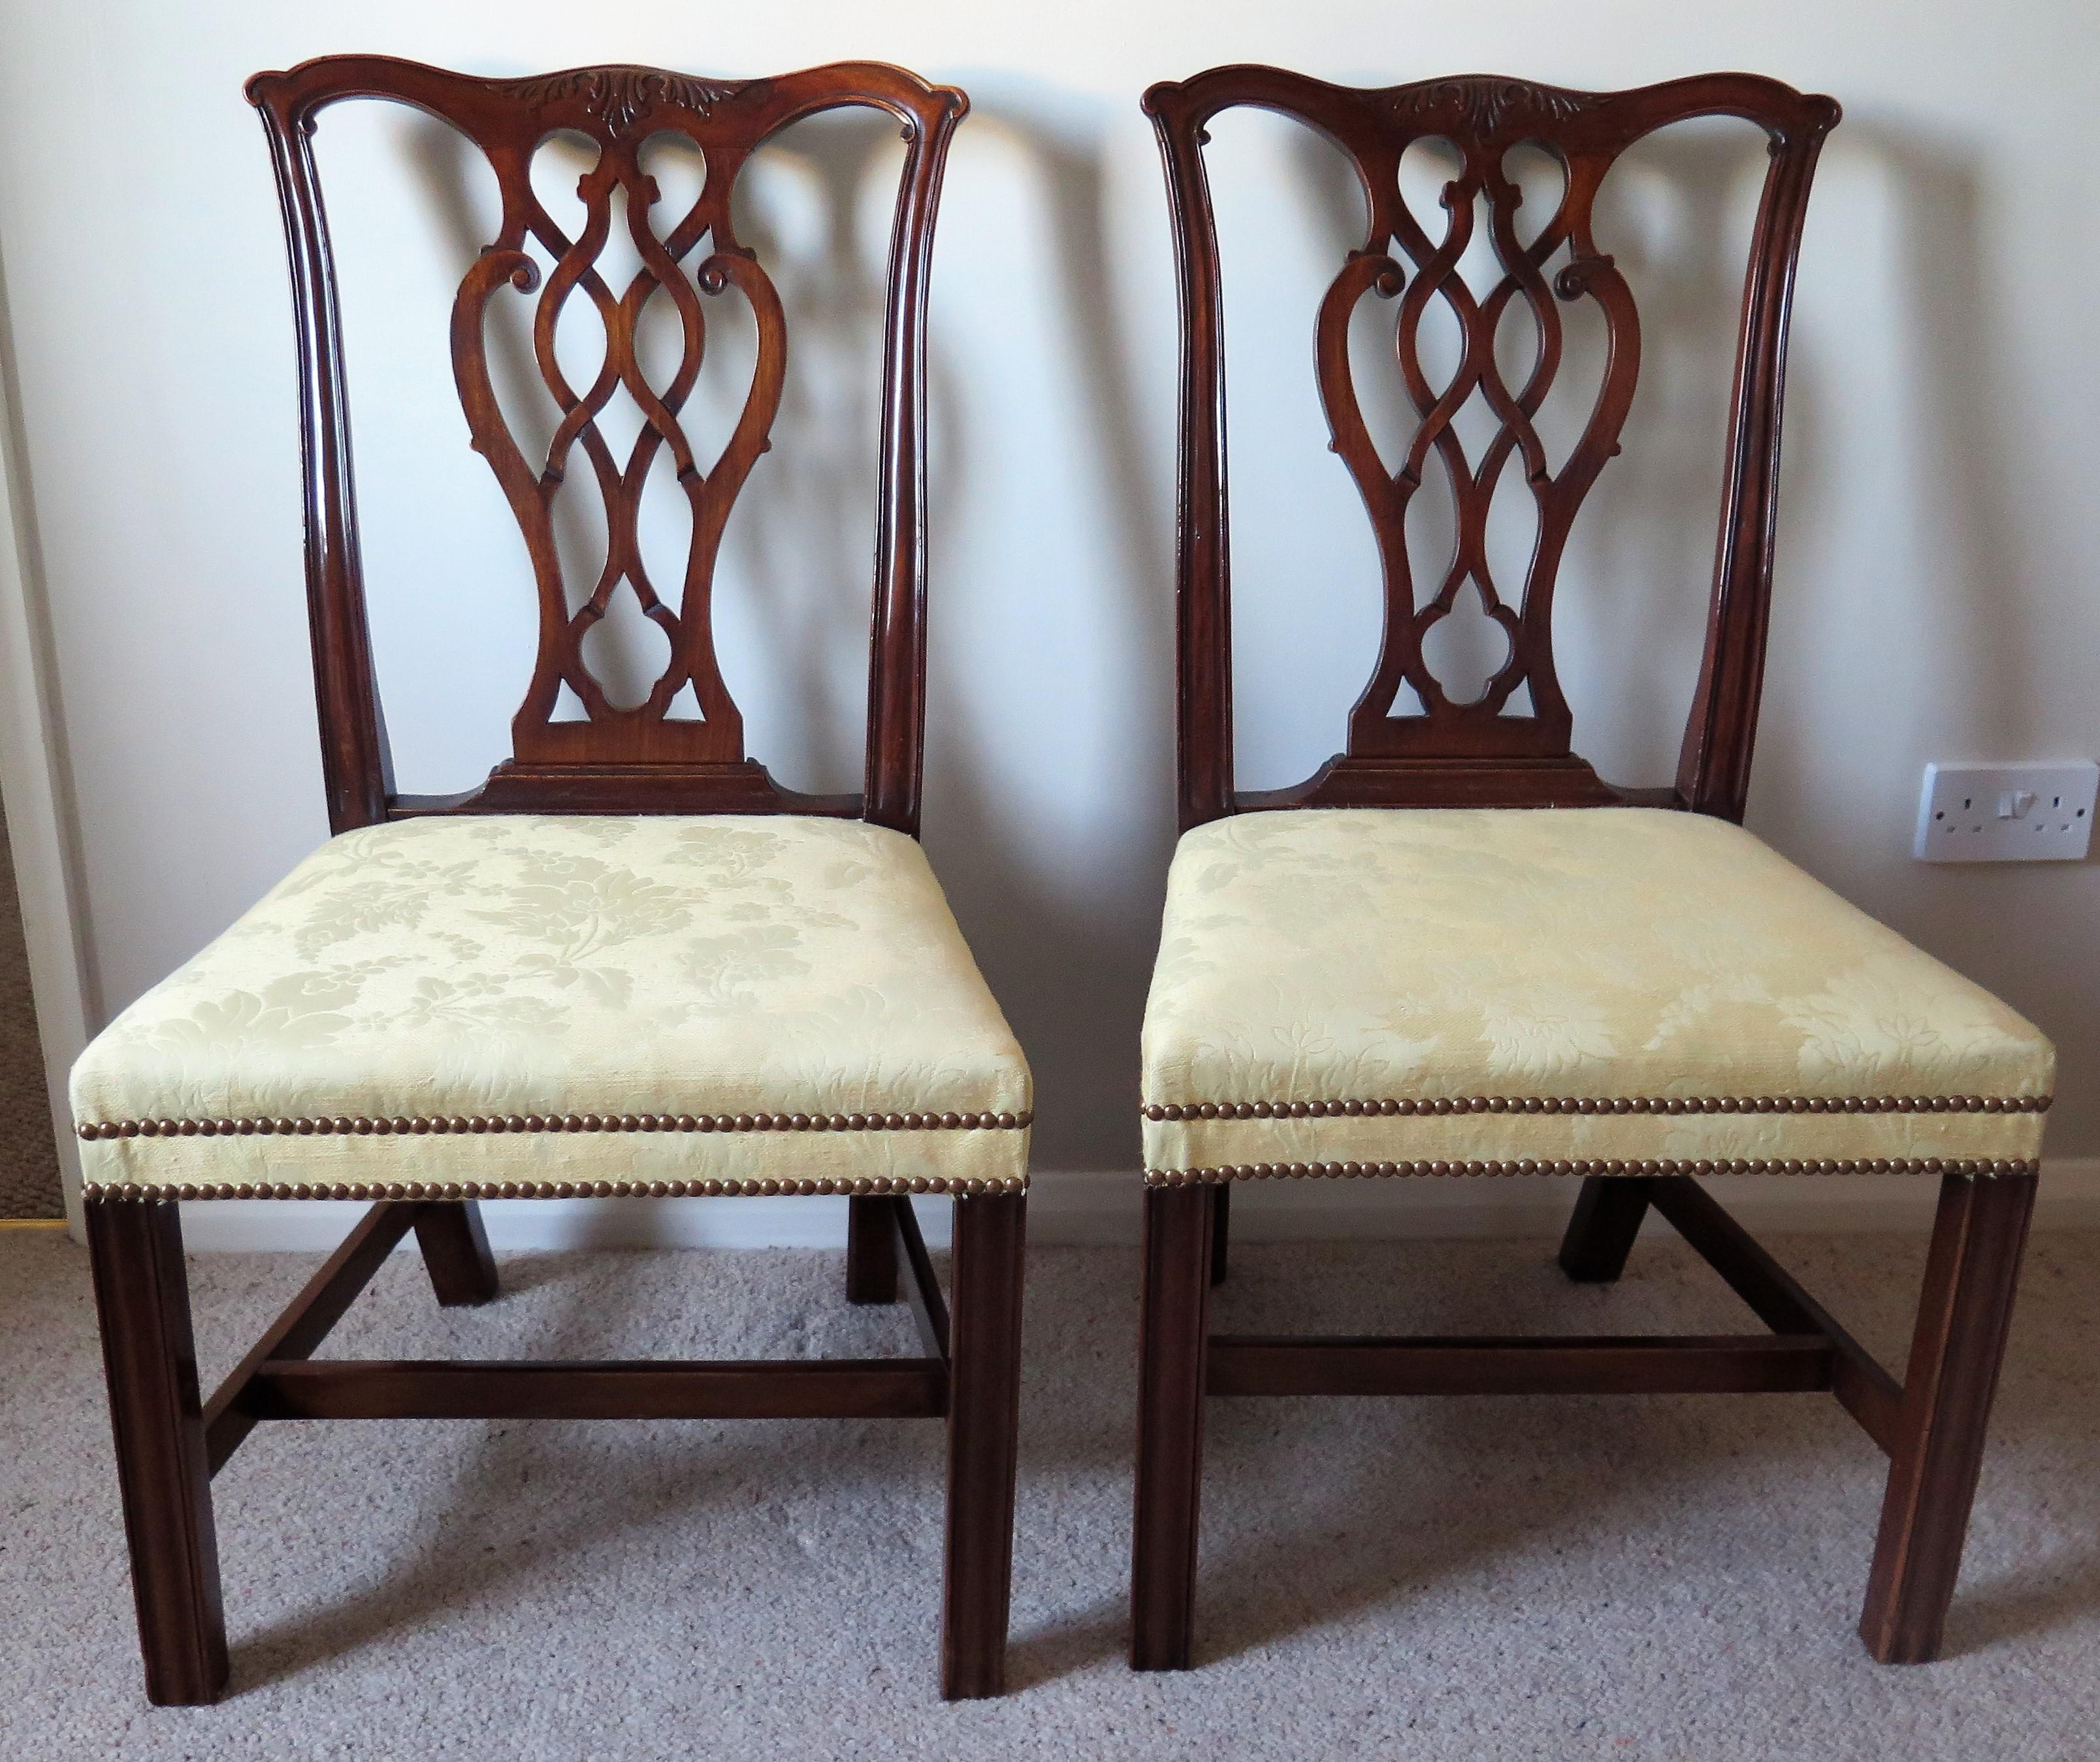 English Pair of Elegant George 111 Mahogany Chippendale Chairs Reupholstered, Circa 1770